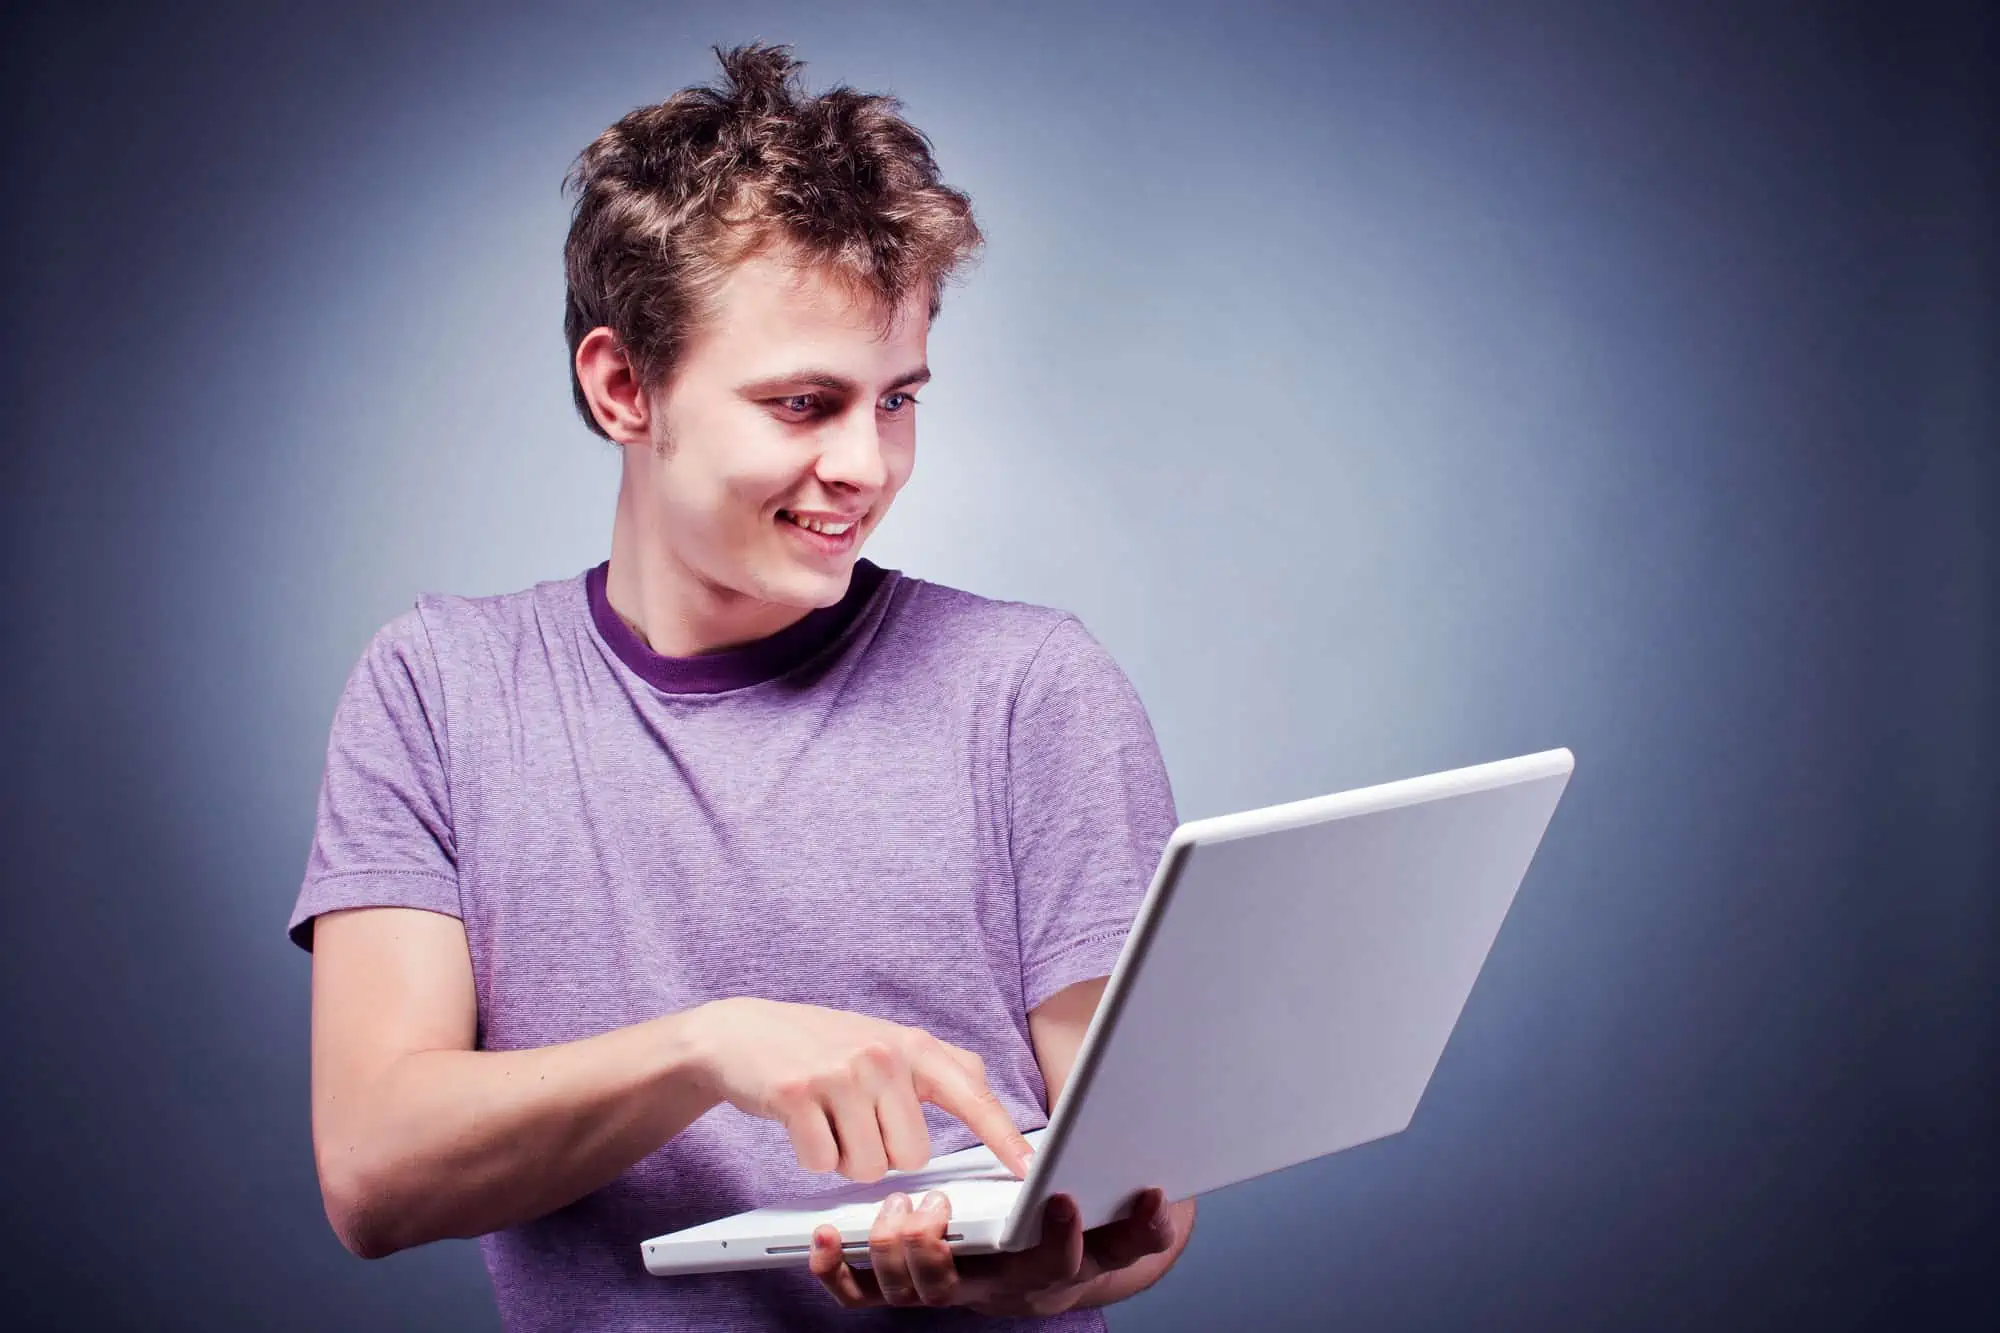 A young man is using a laptop computer